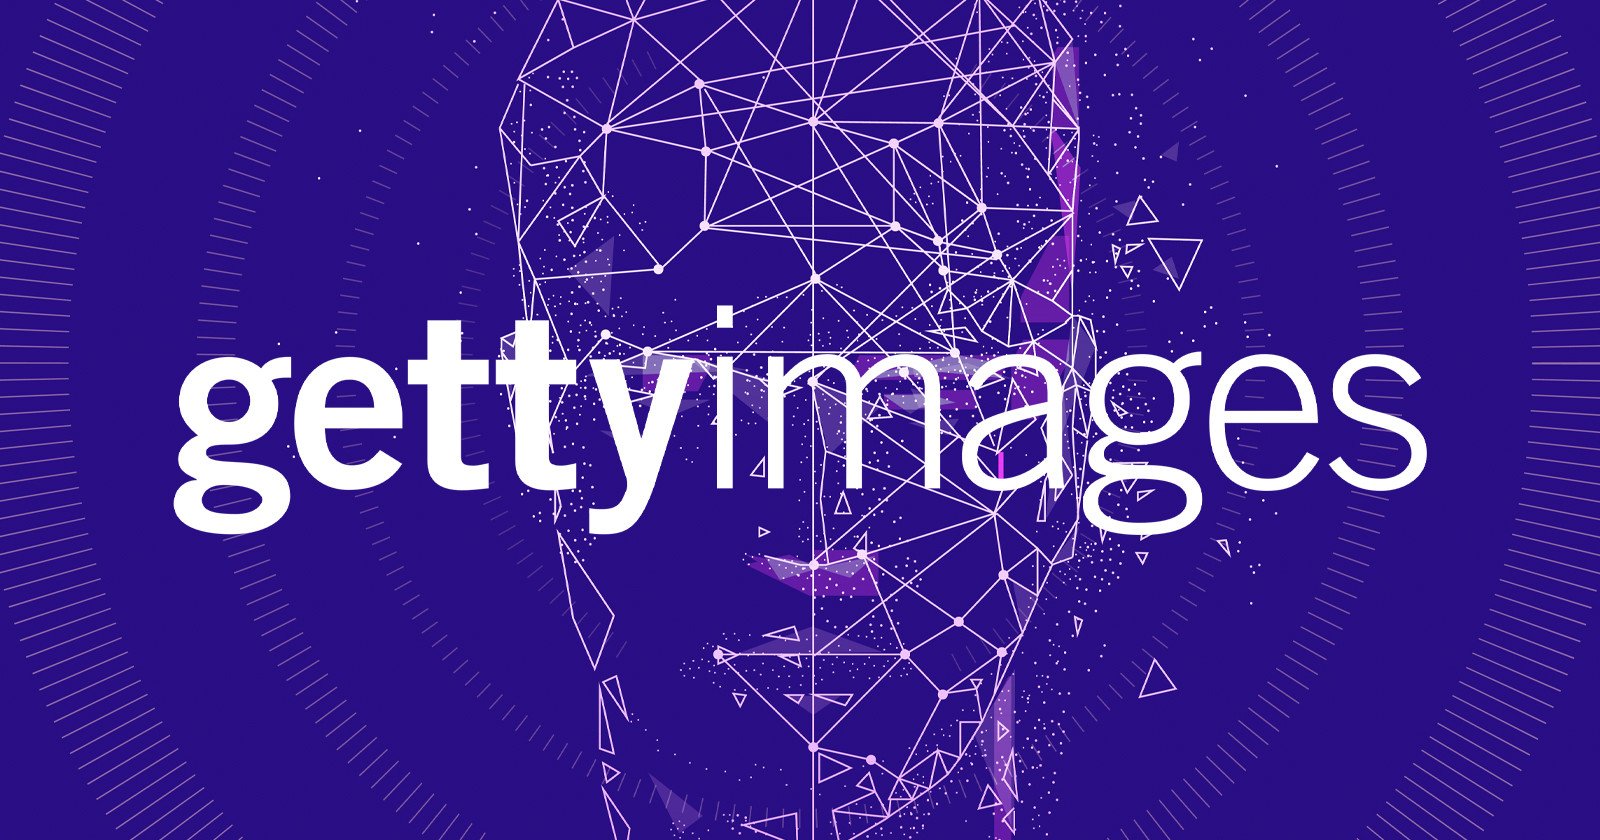 Getty Images Launches First Model Release That Covers AI and Biometrics